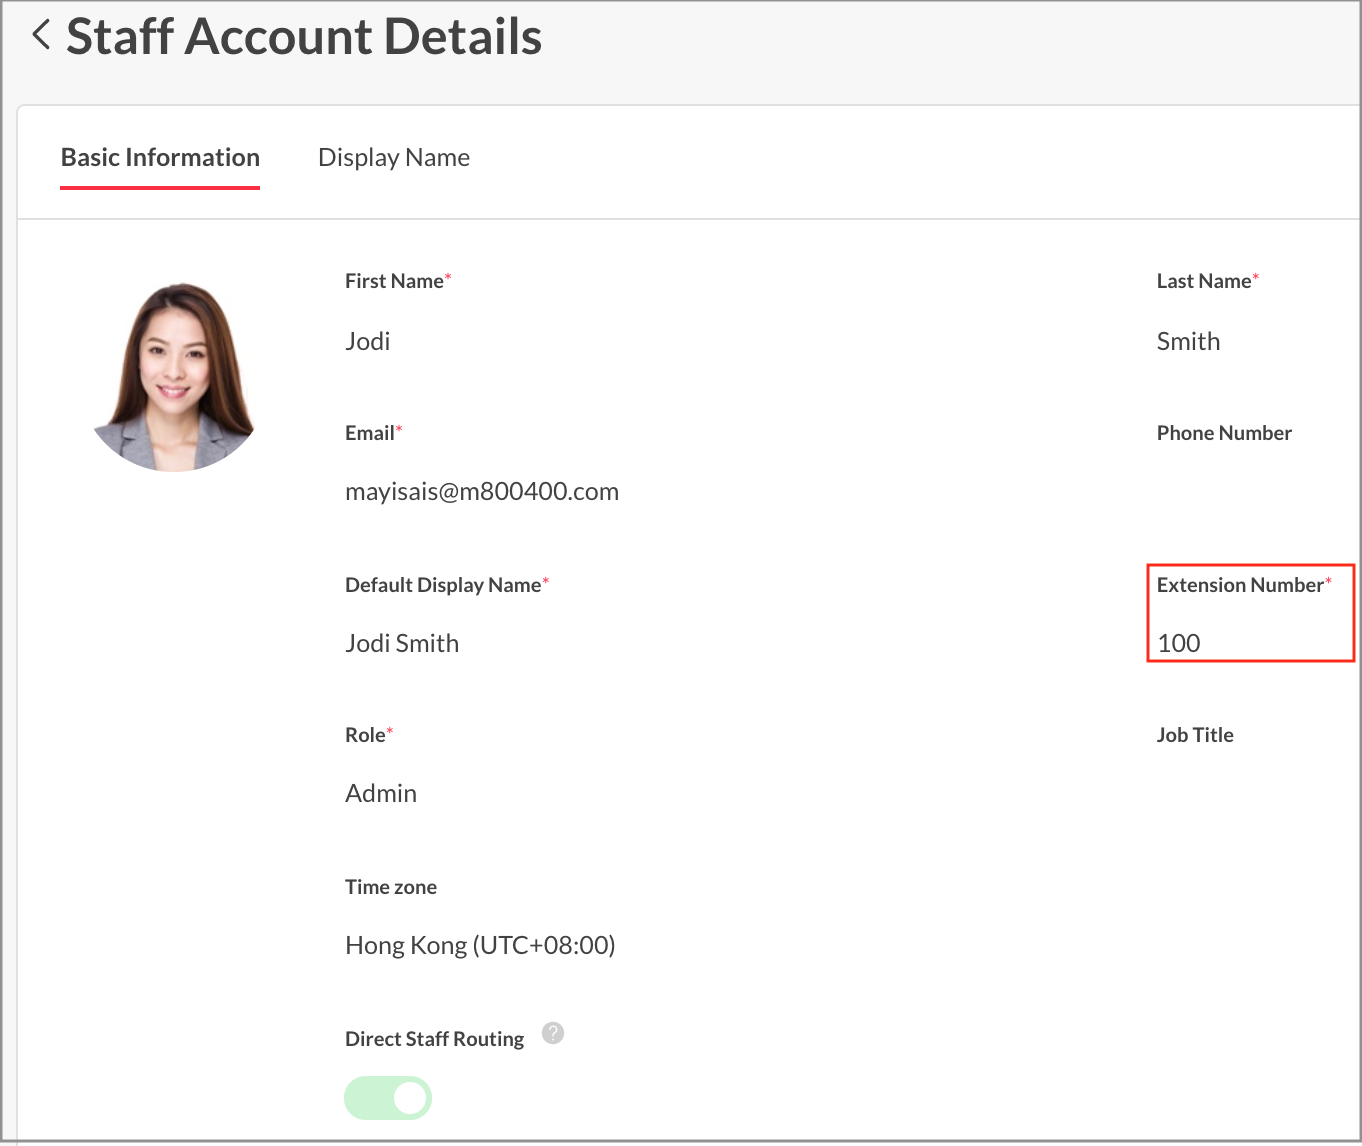 Extension Number in the Staff Account Details